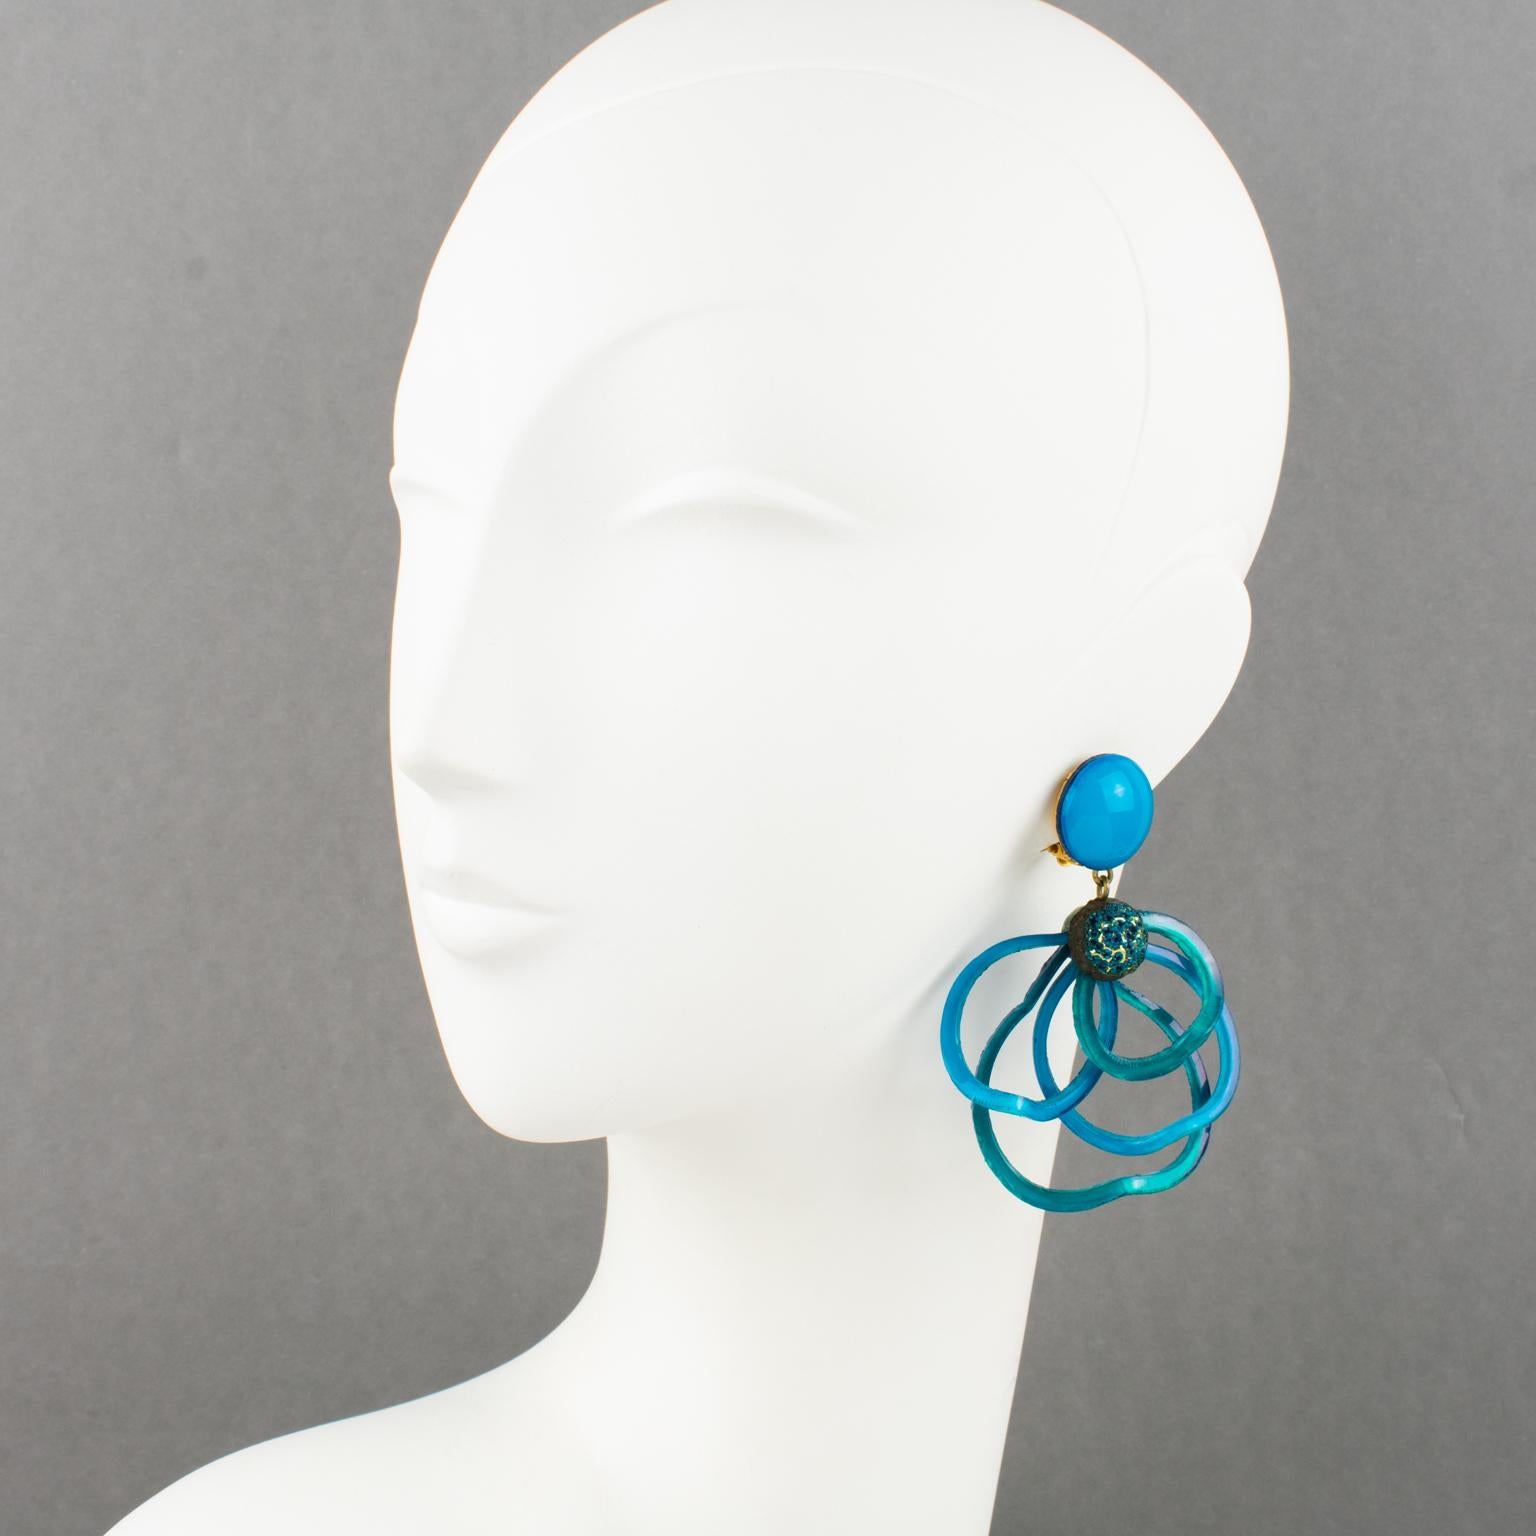 Cilea Paris created these lovely dimensional dangling clip-on earrings. These hand-made artisanal resin earrings feature multi-loop arabesque ribbons textured patterns to build together and form a powerful statement piece. The pieces boast a vivid